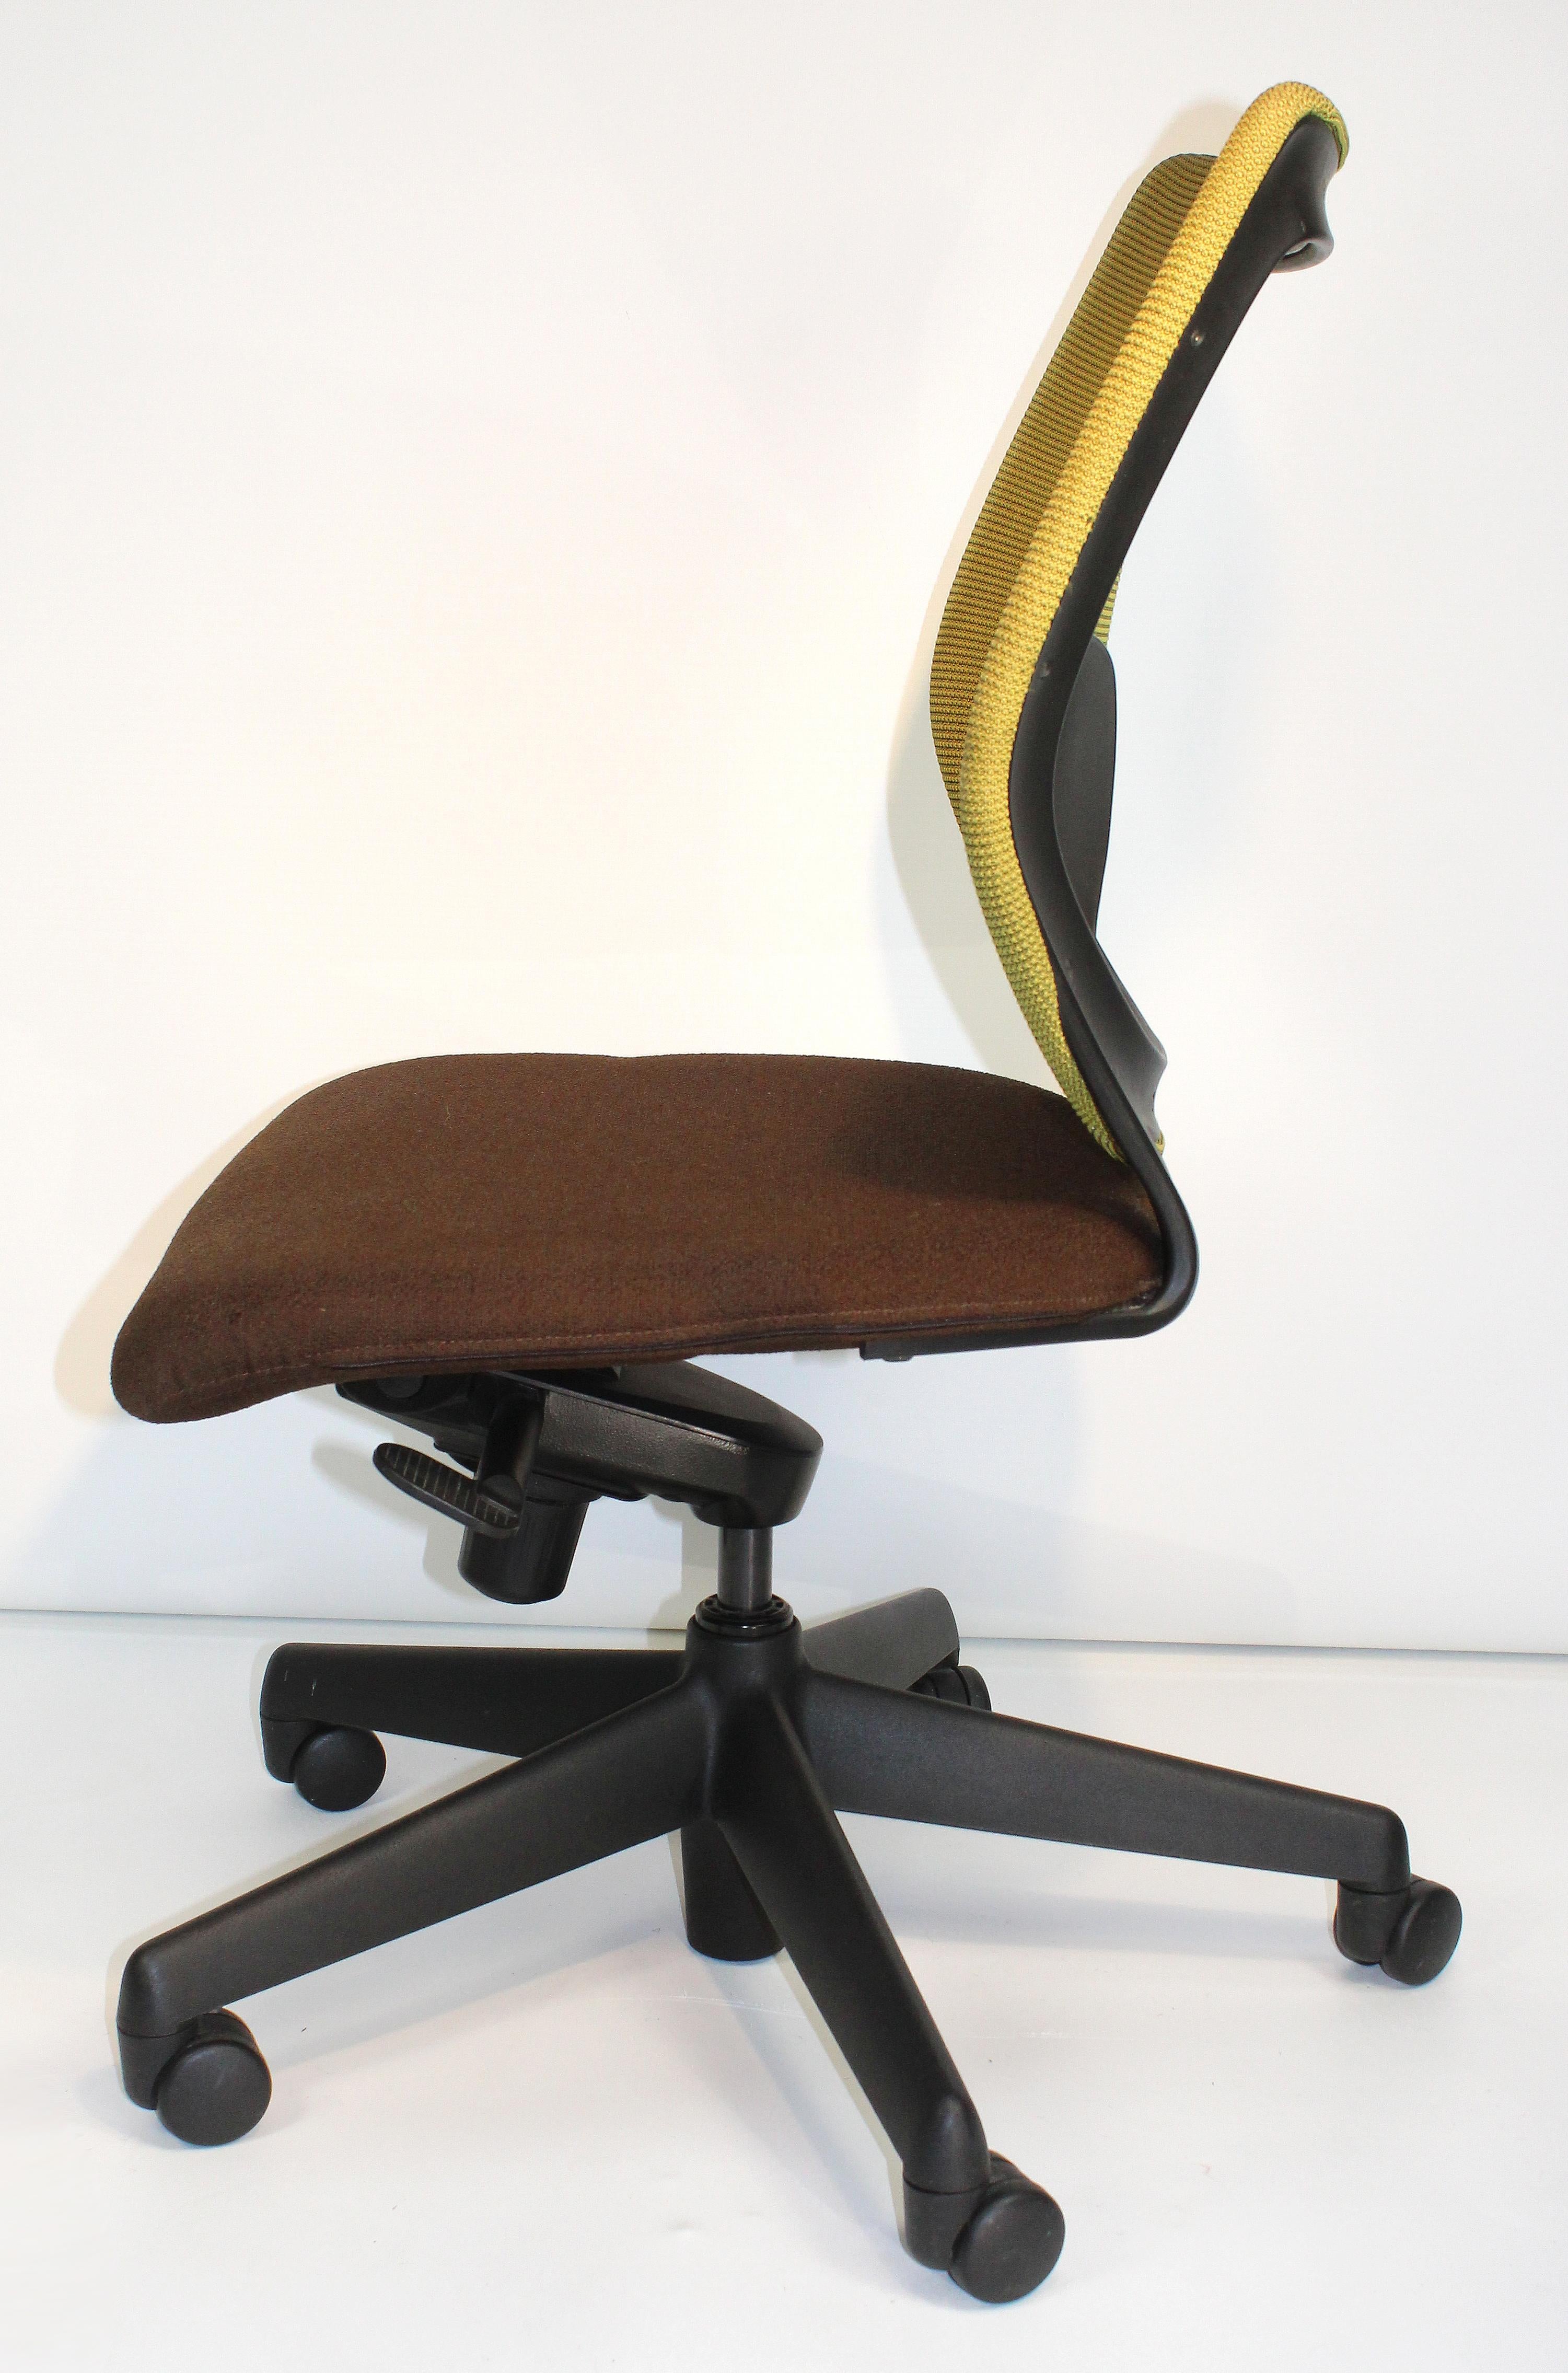 Mark Kapka 'Canada' Ergonomic Swivel Desk Chair Designed 

Offered for sale is an ergonomic, mesh back swivel desk chair designed by Mark Kapka for Keilhauer furniture of Canada. The chair offers lumbar support, pneumatic height adjustment, a mesh